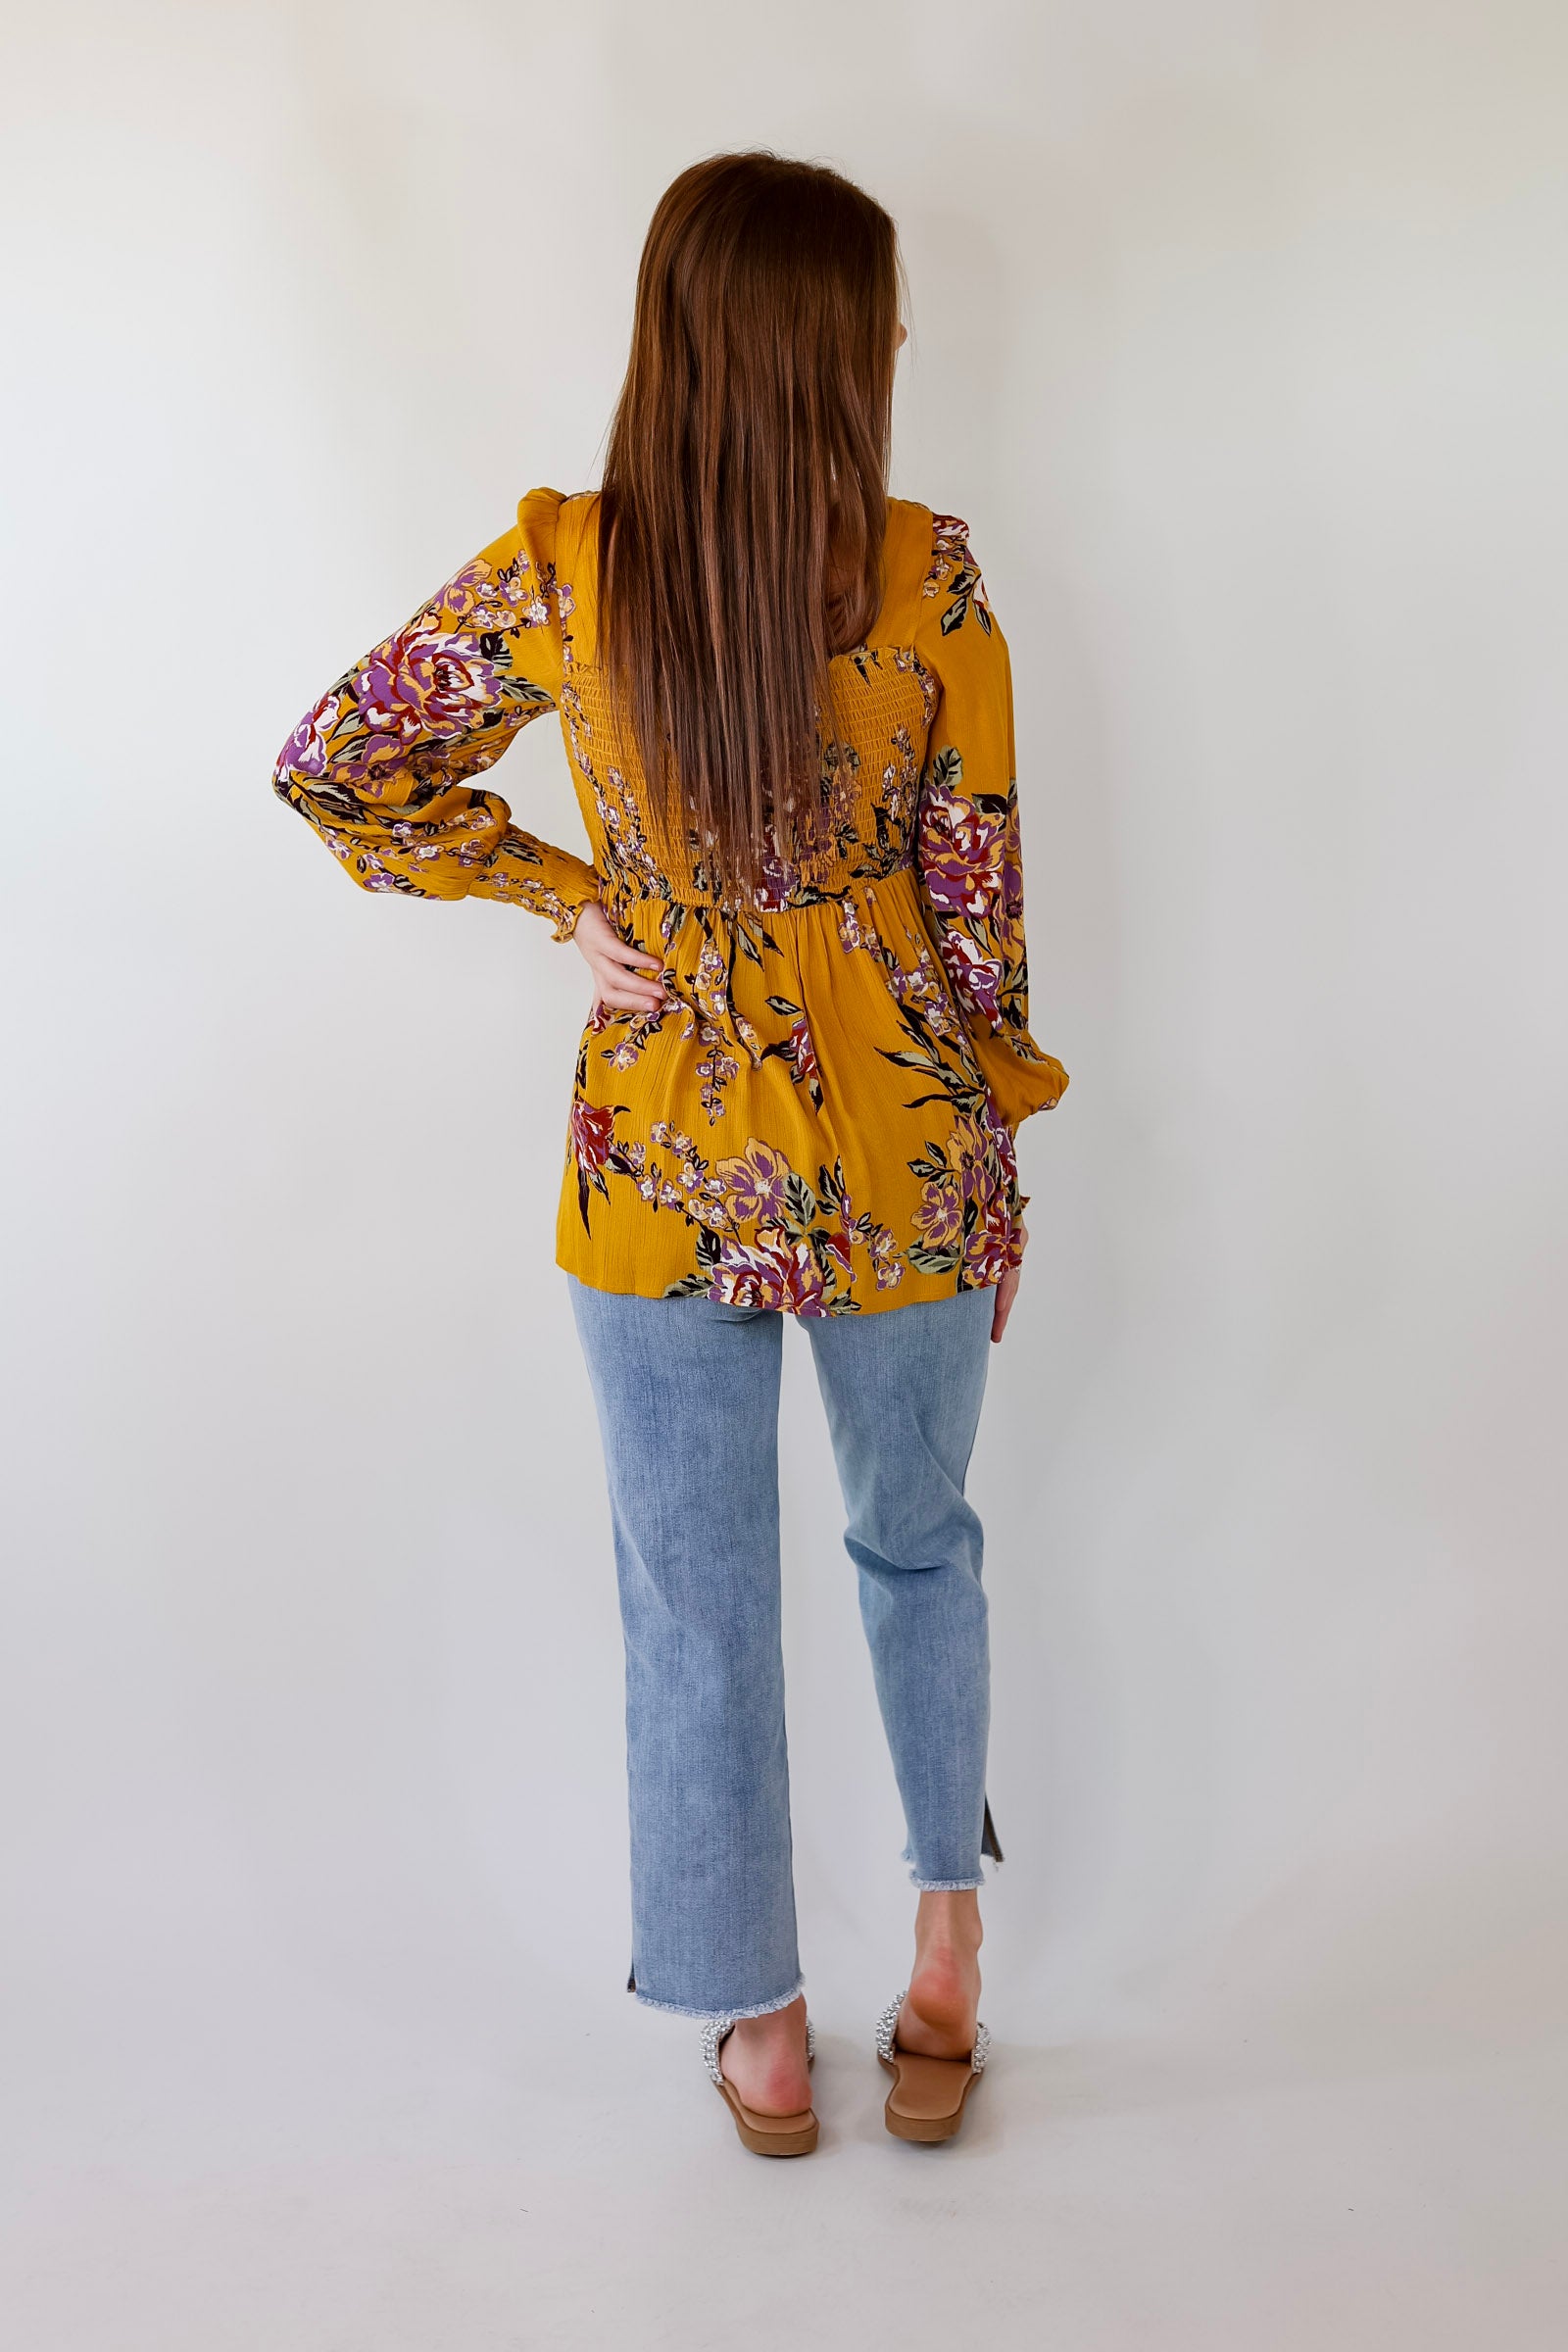 Fairfield Feeling Floral Smocked Babydoll Top with Long Sleeves in Mustard Yellow - Giddy Up Glamour Boutique